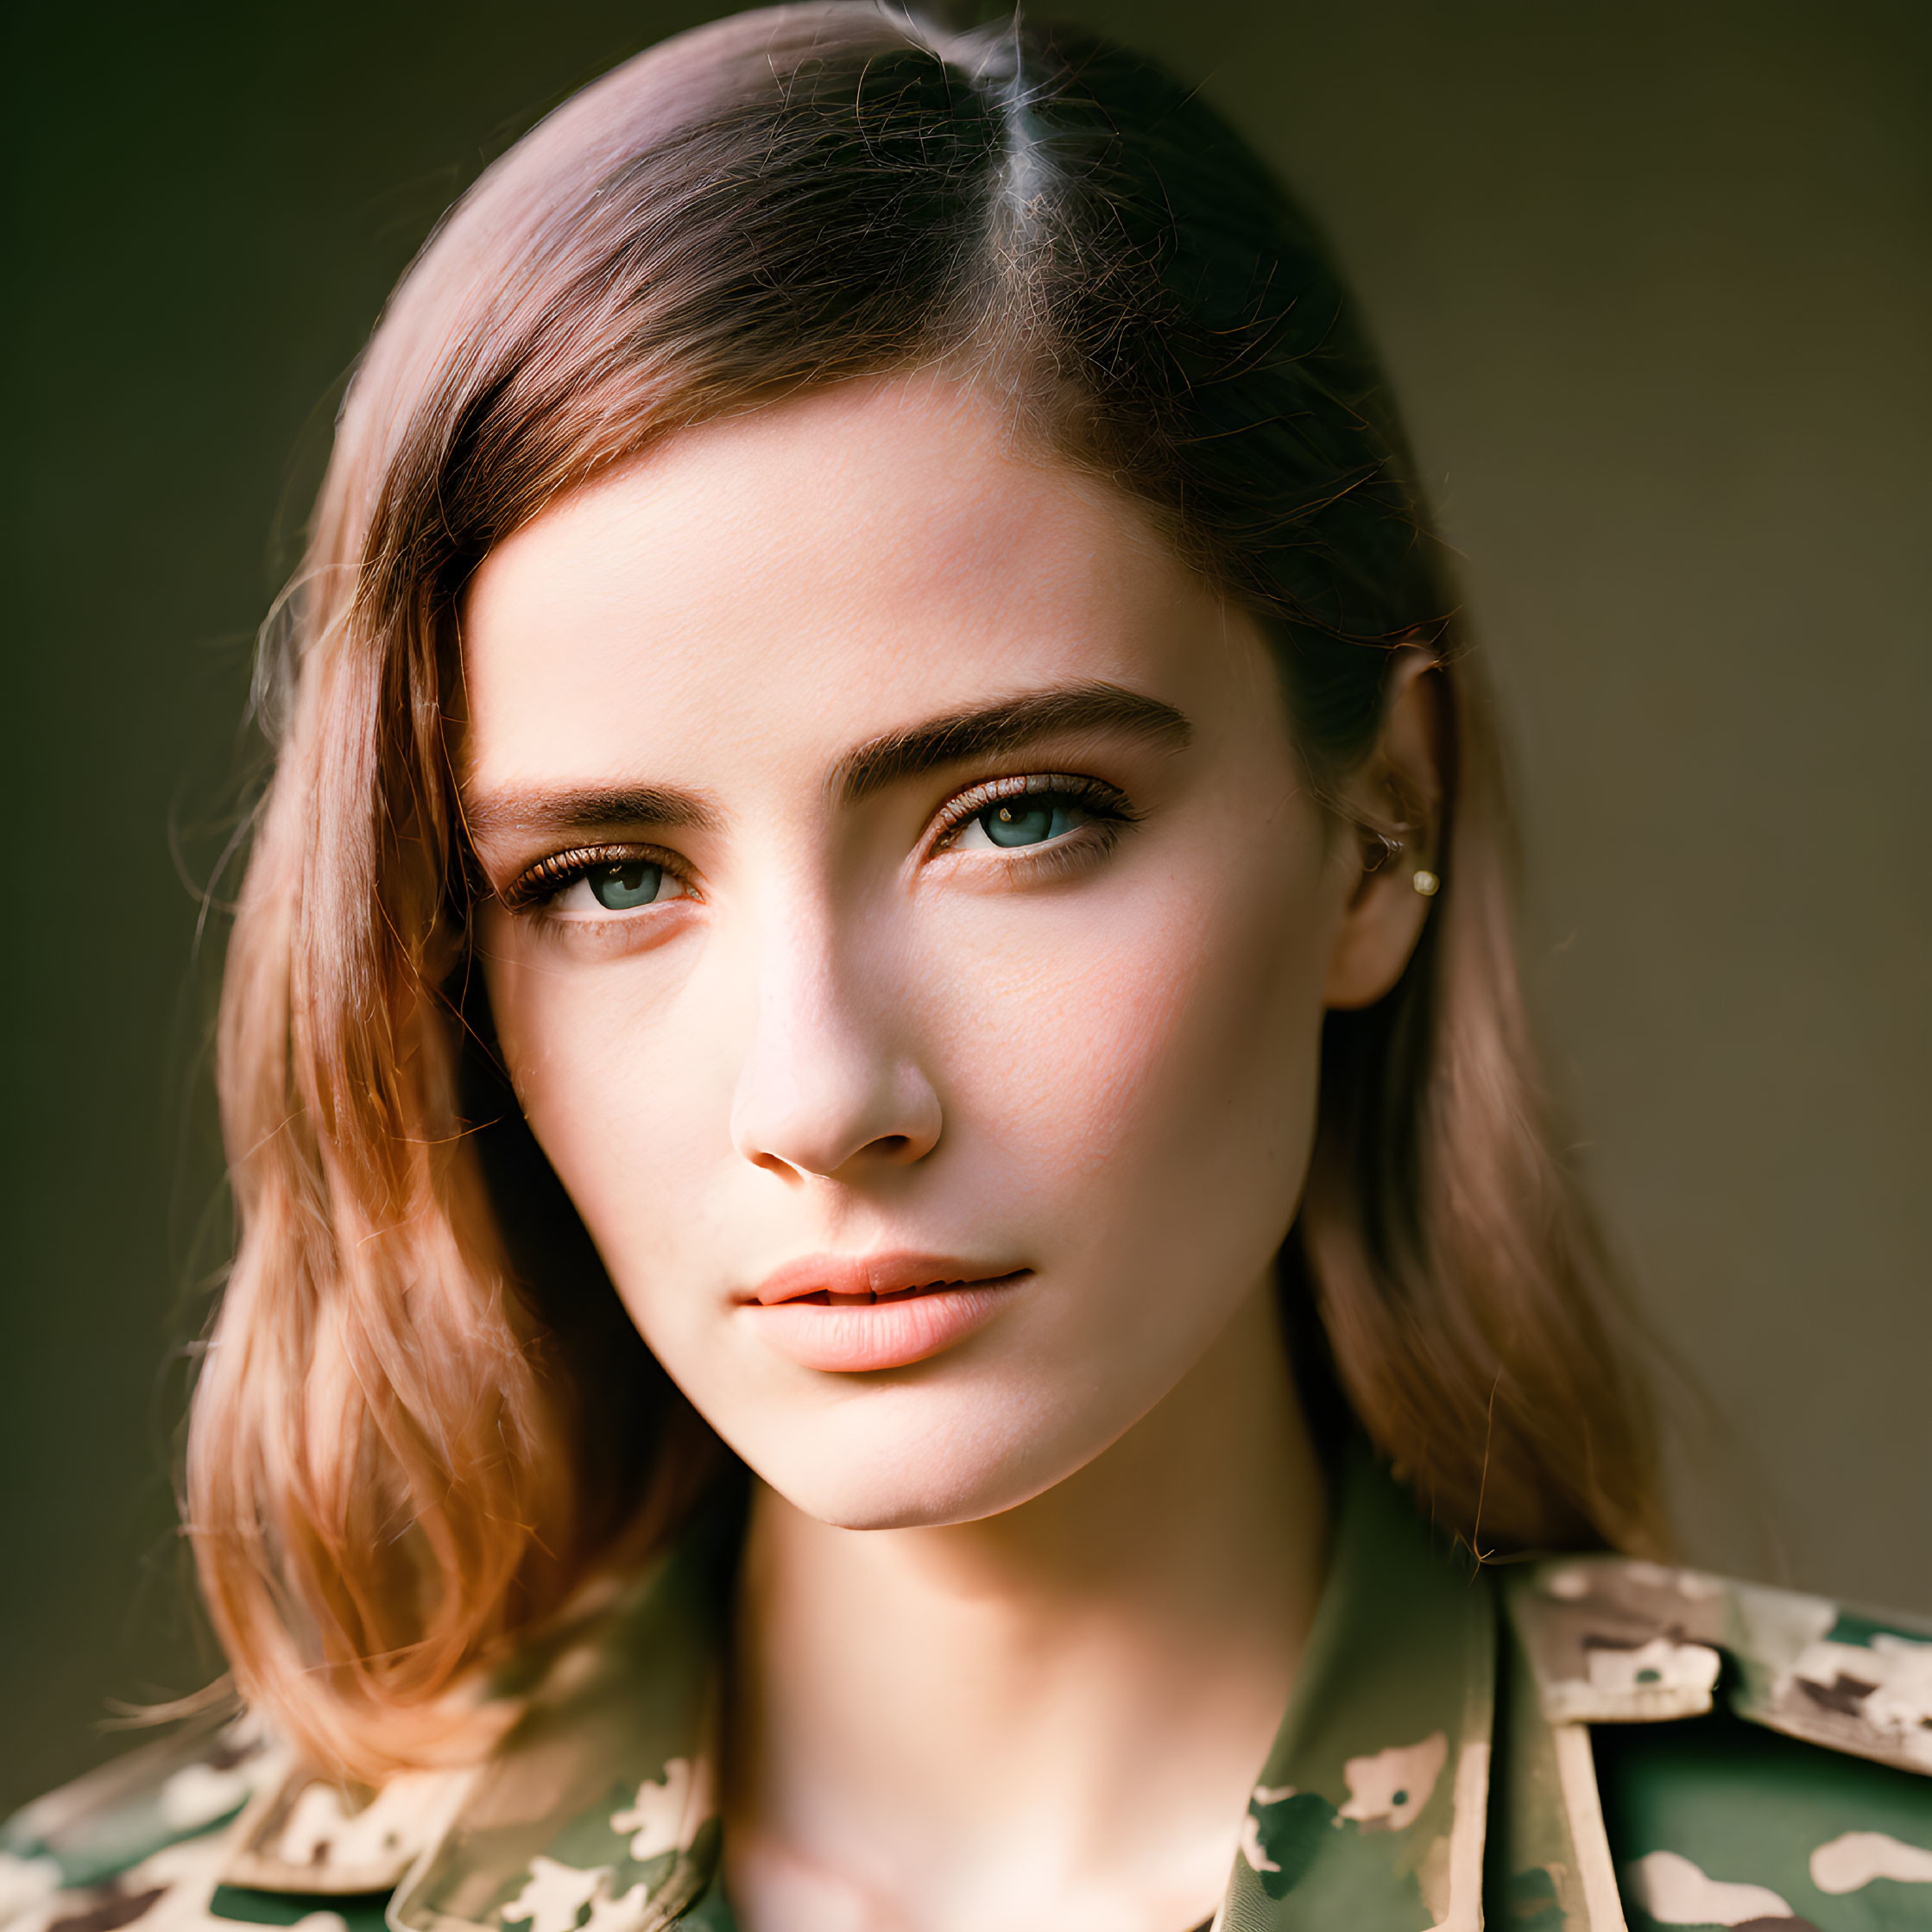 Portrait of Woman with Brown Hair and Green Eyes in Camo Jacket